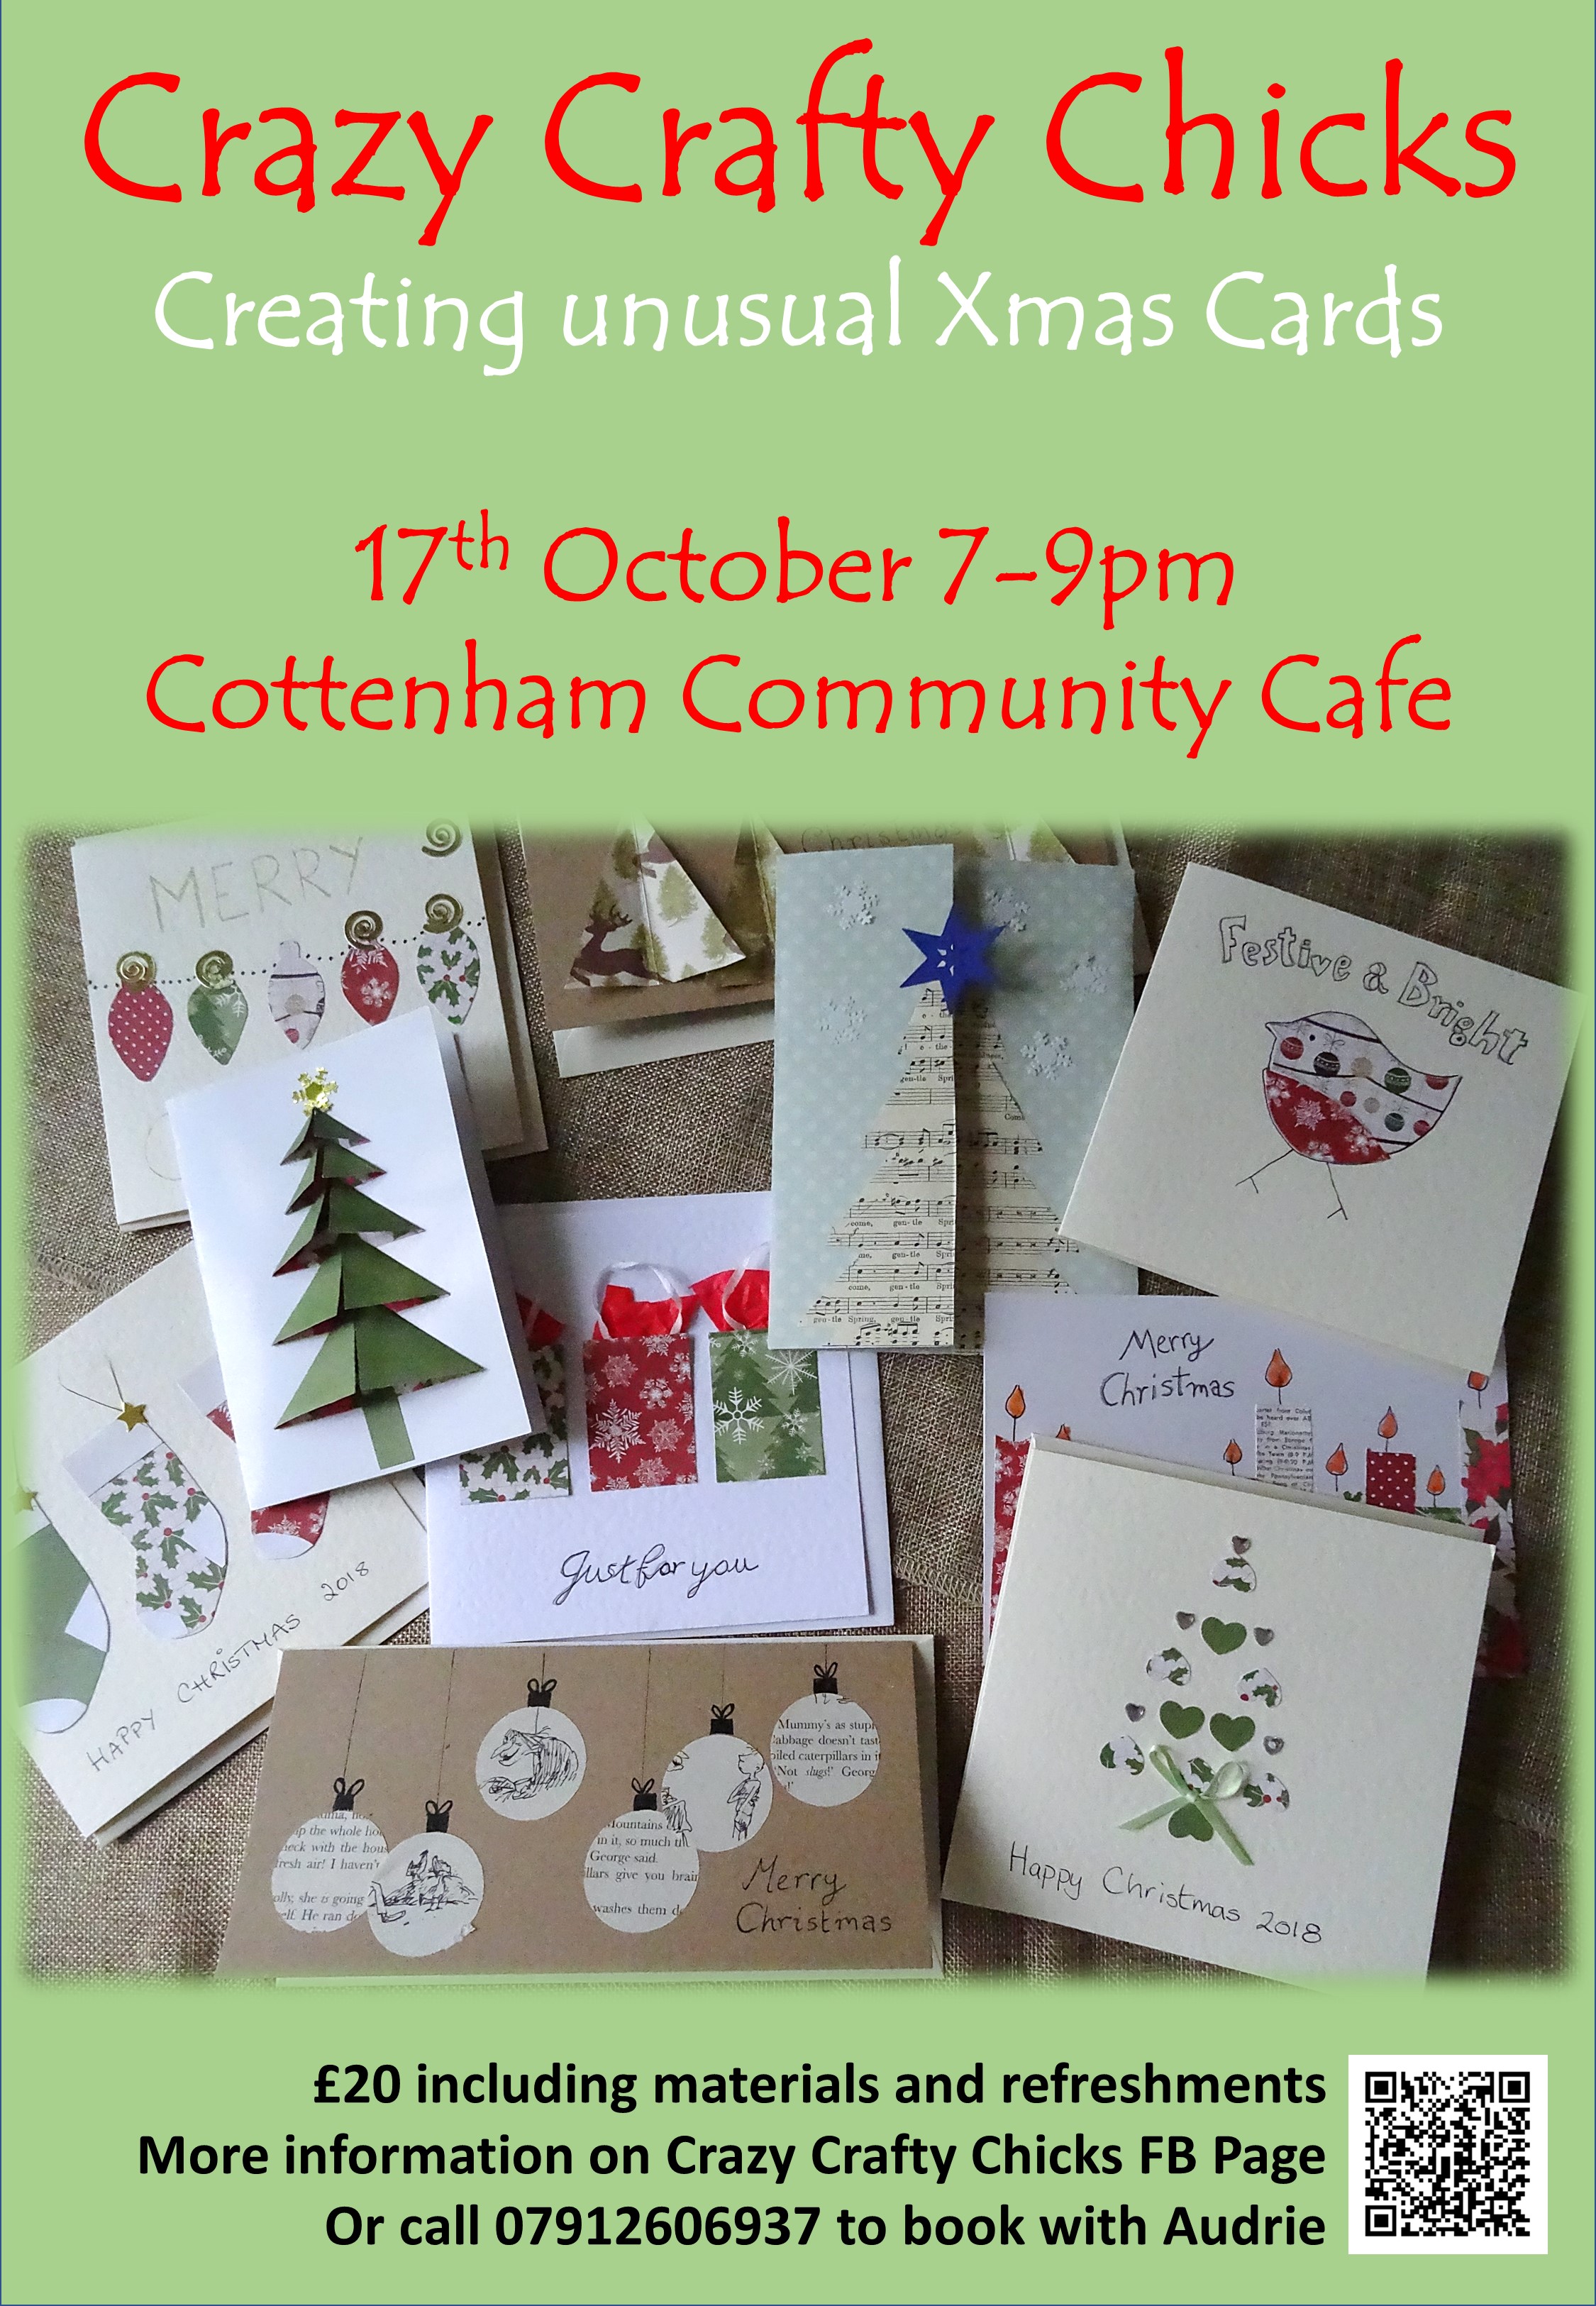 Creating unusual Xmas cards - CCC - 17th Oct 2018